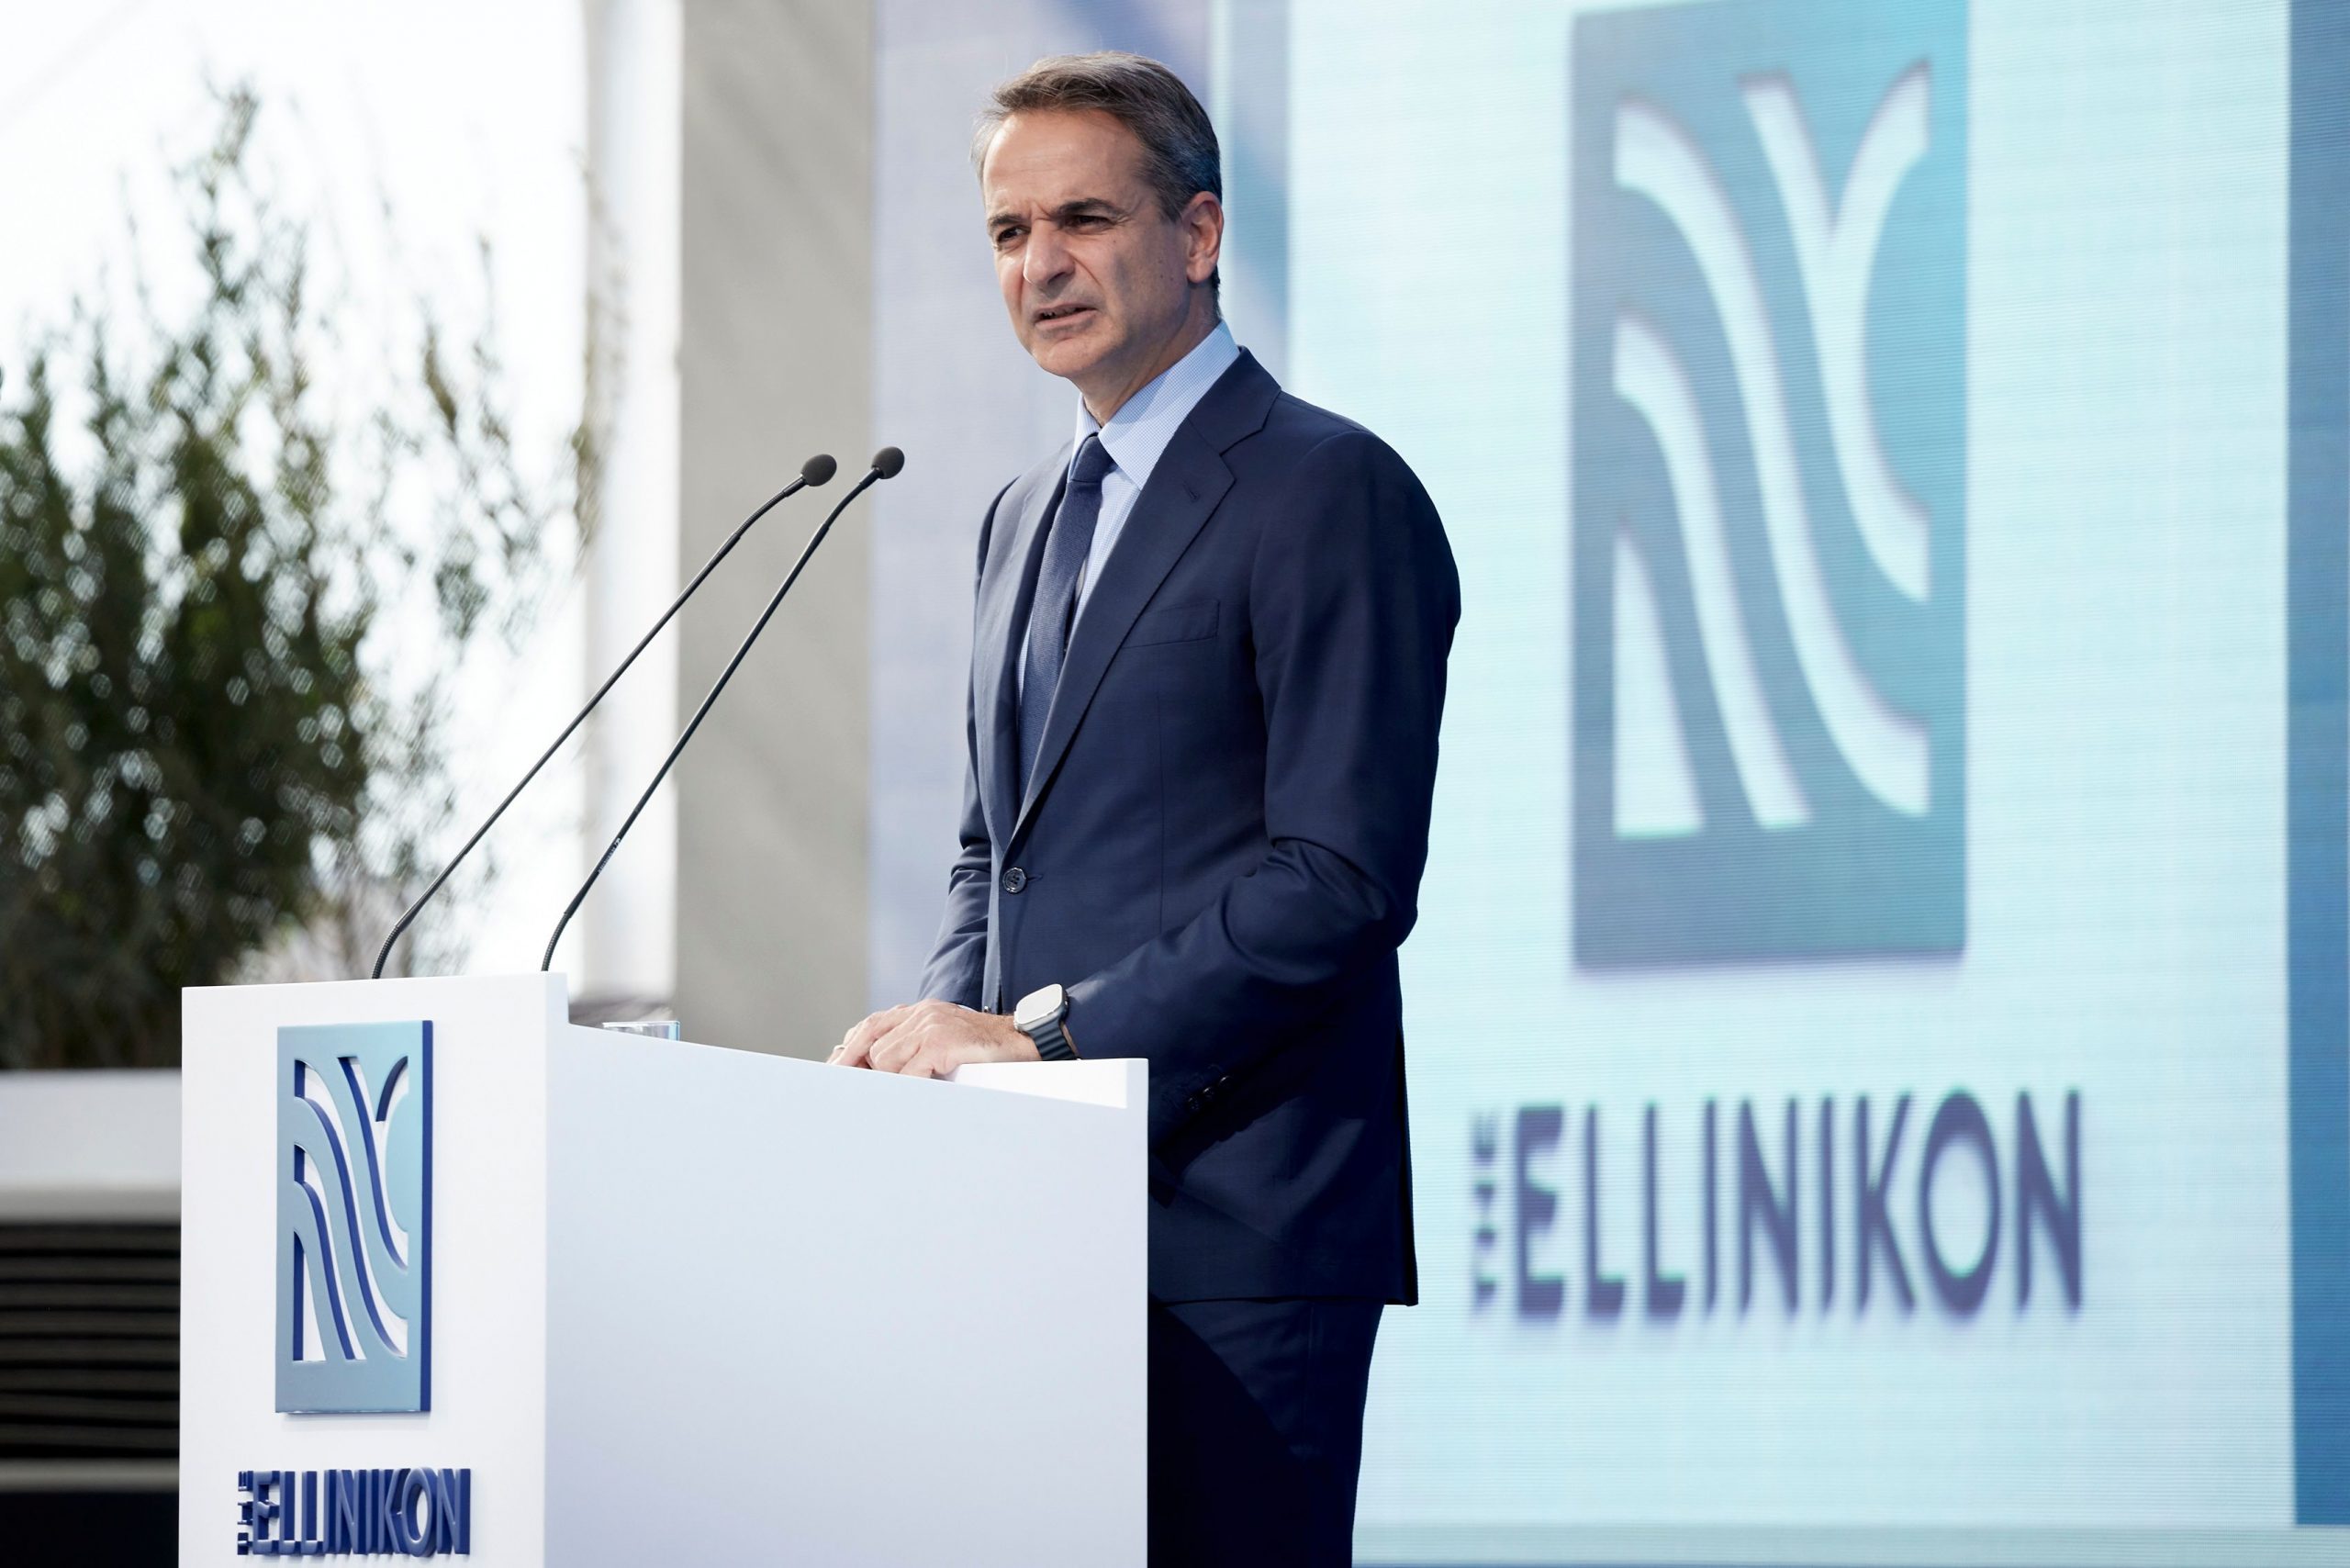 Mitsotakis: Helleniko project one of the biggest urban interventions in Europe